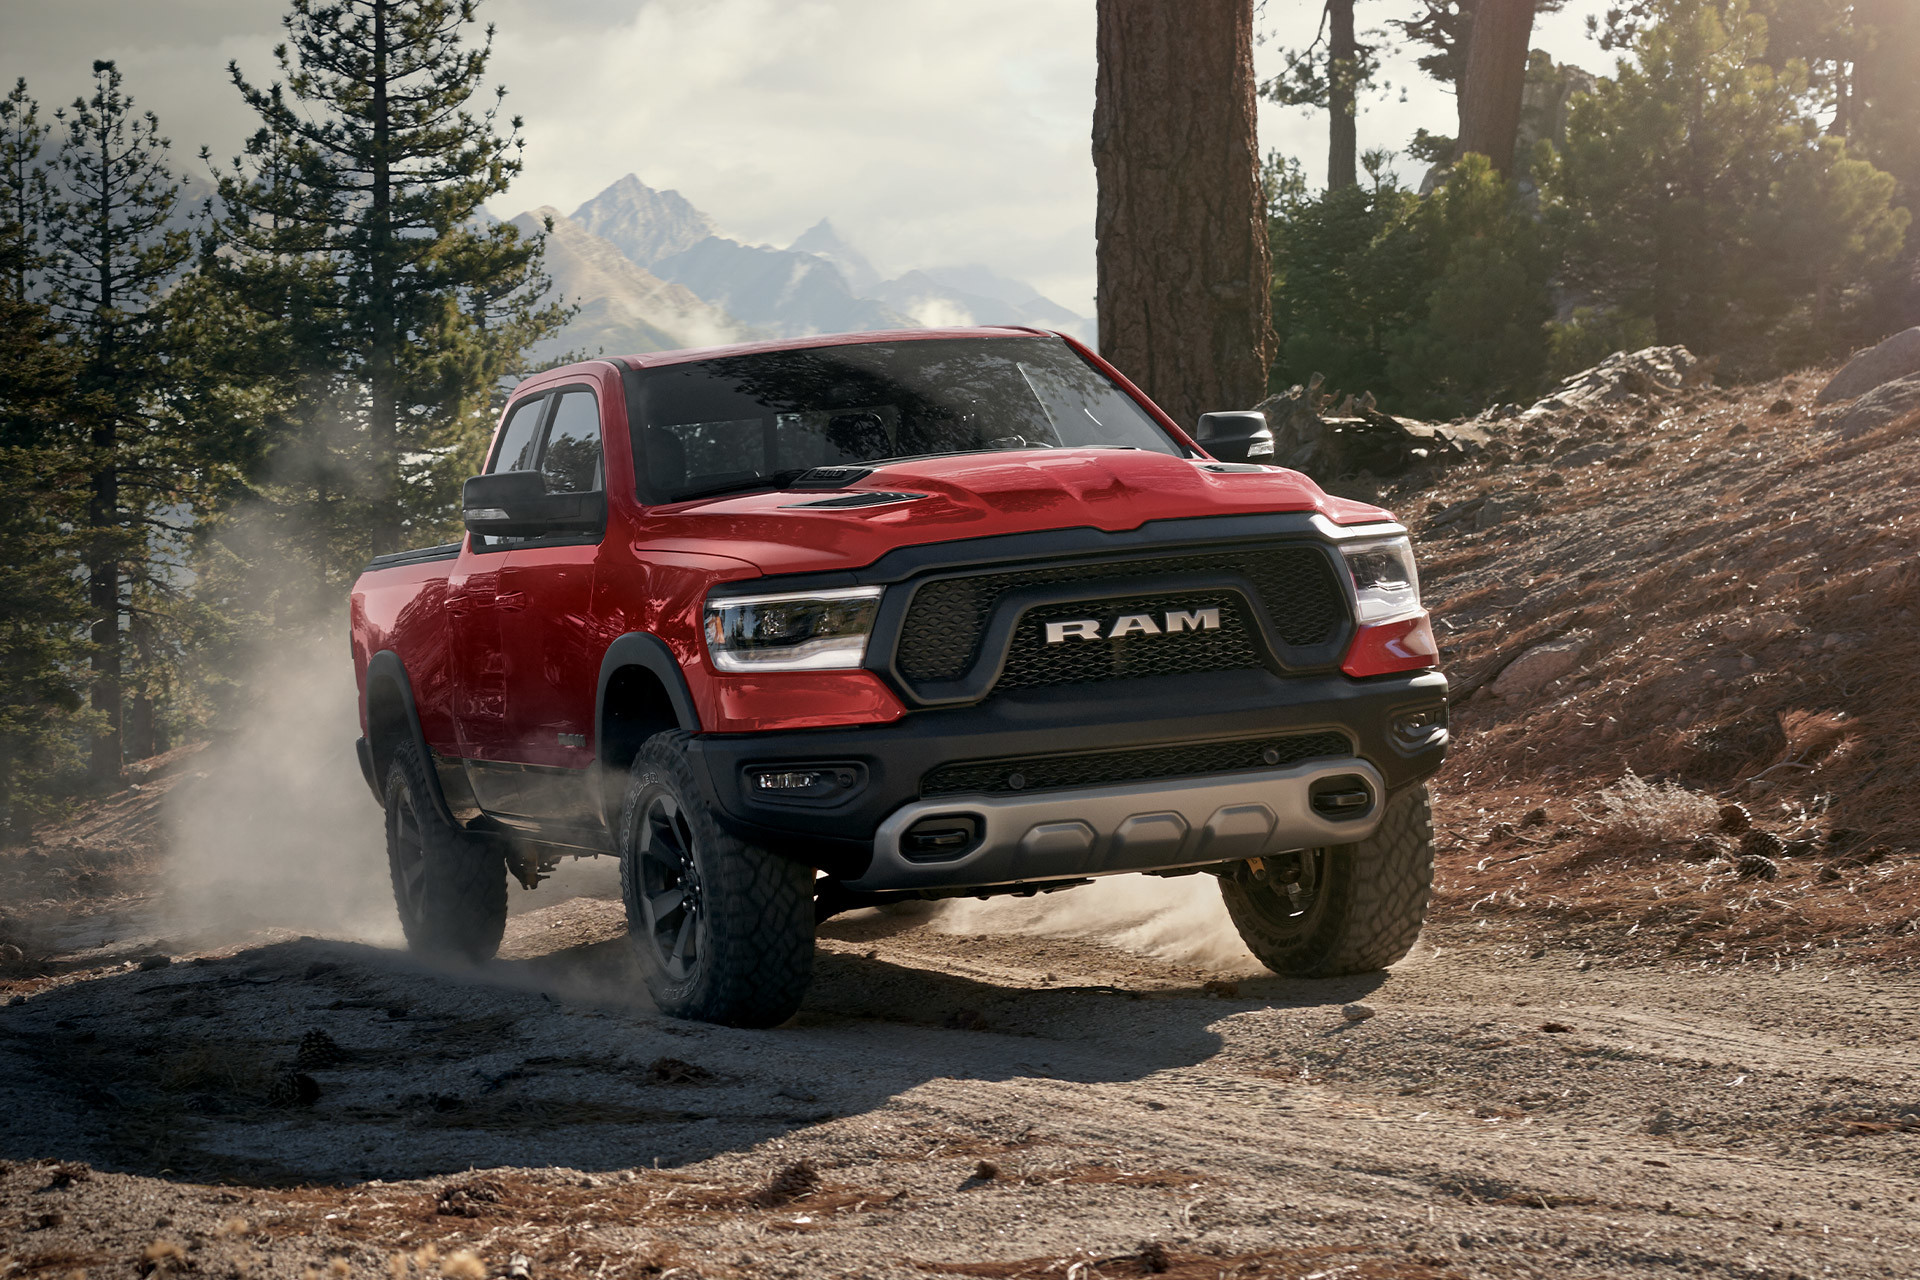 Red 2022 Ram 1500 driving off road through a forest